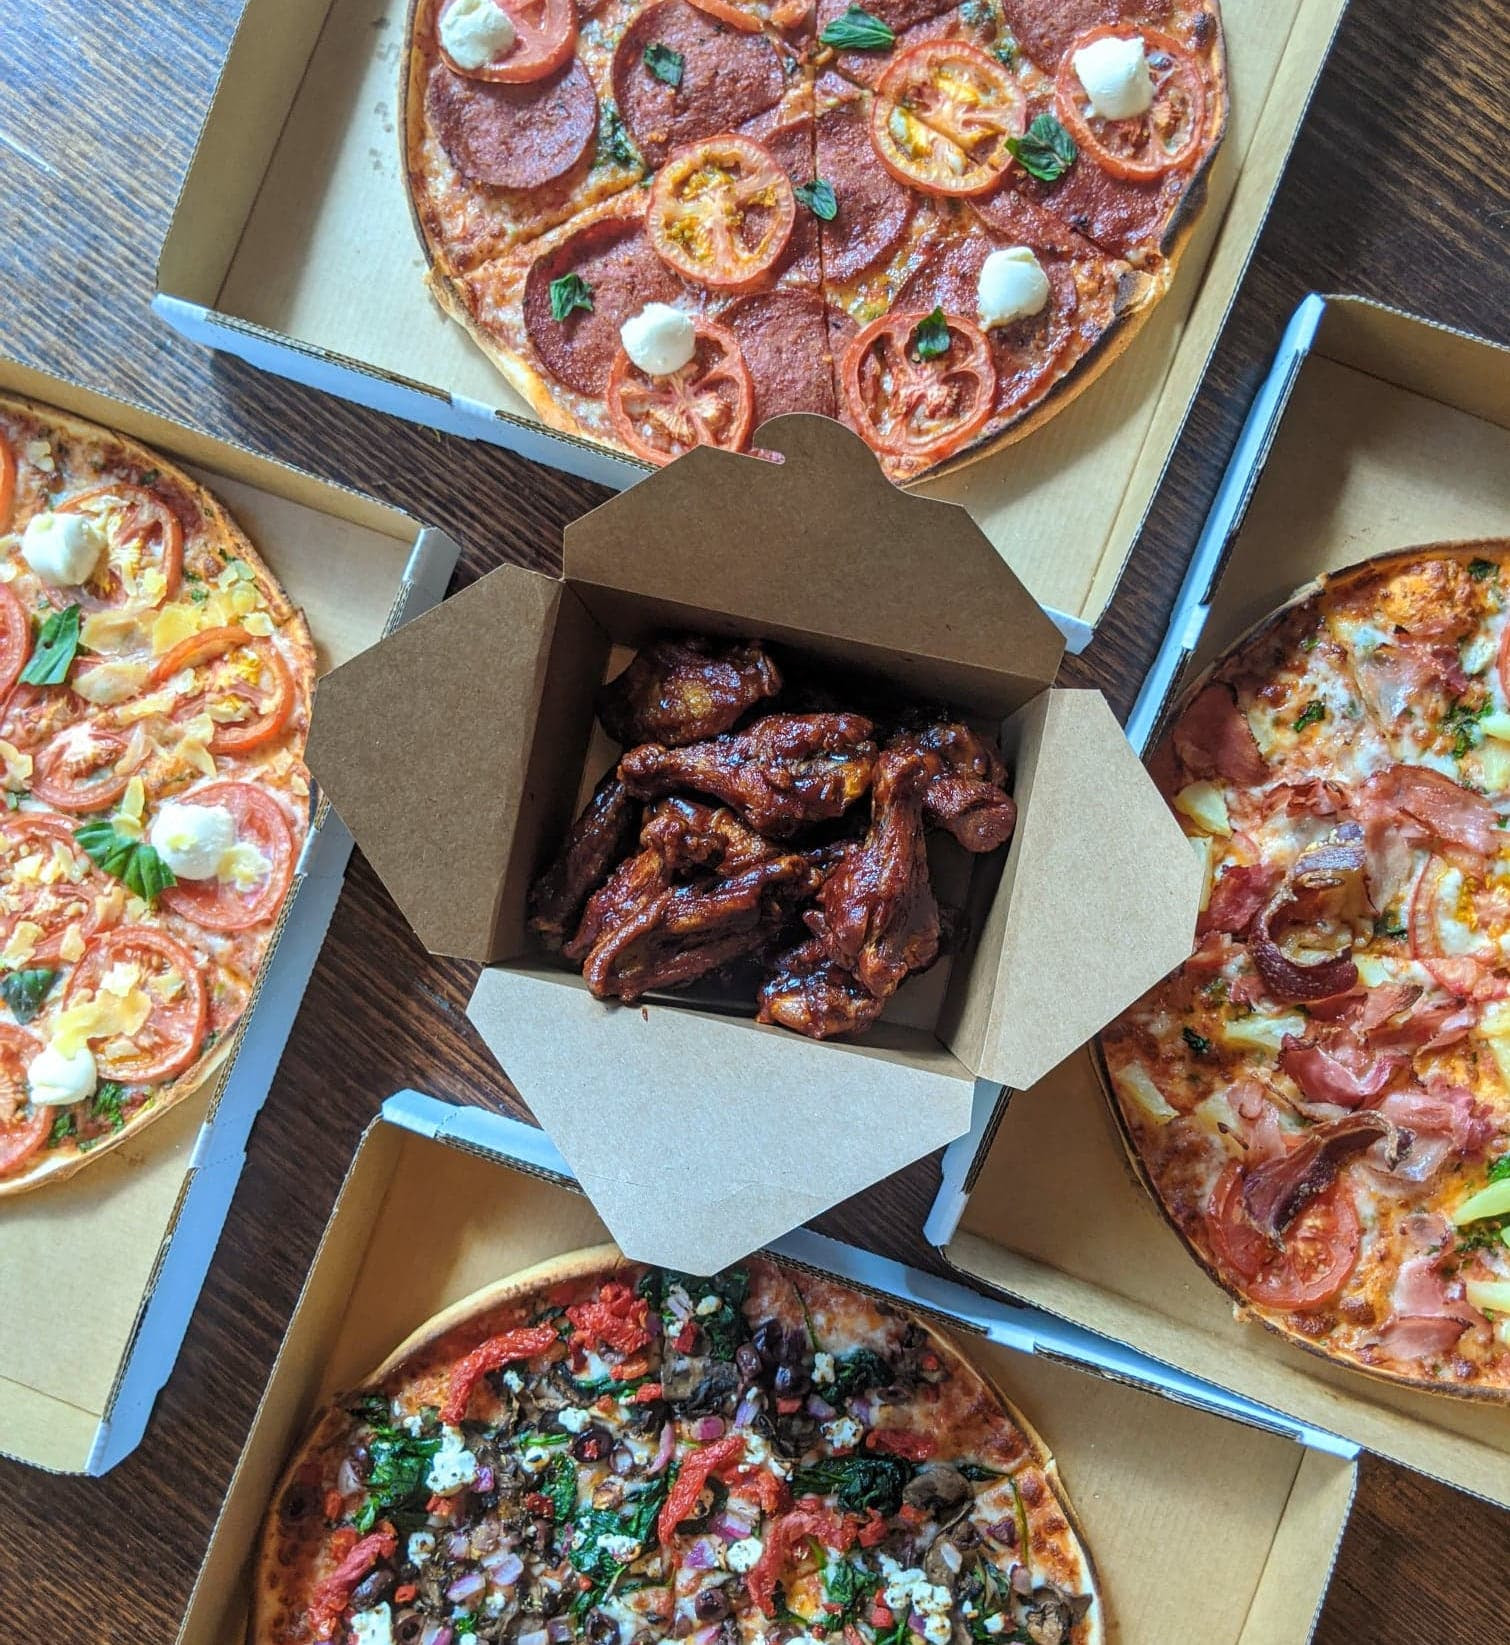 DEAL: Bondi Pizza - Free Smokey BBQ Chicken Wings with $35 Purchase via Online Orders (until 10 September 2020) 2